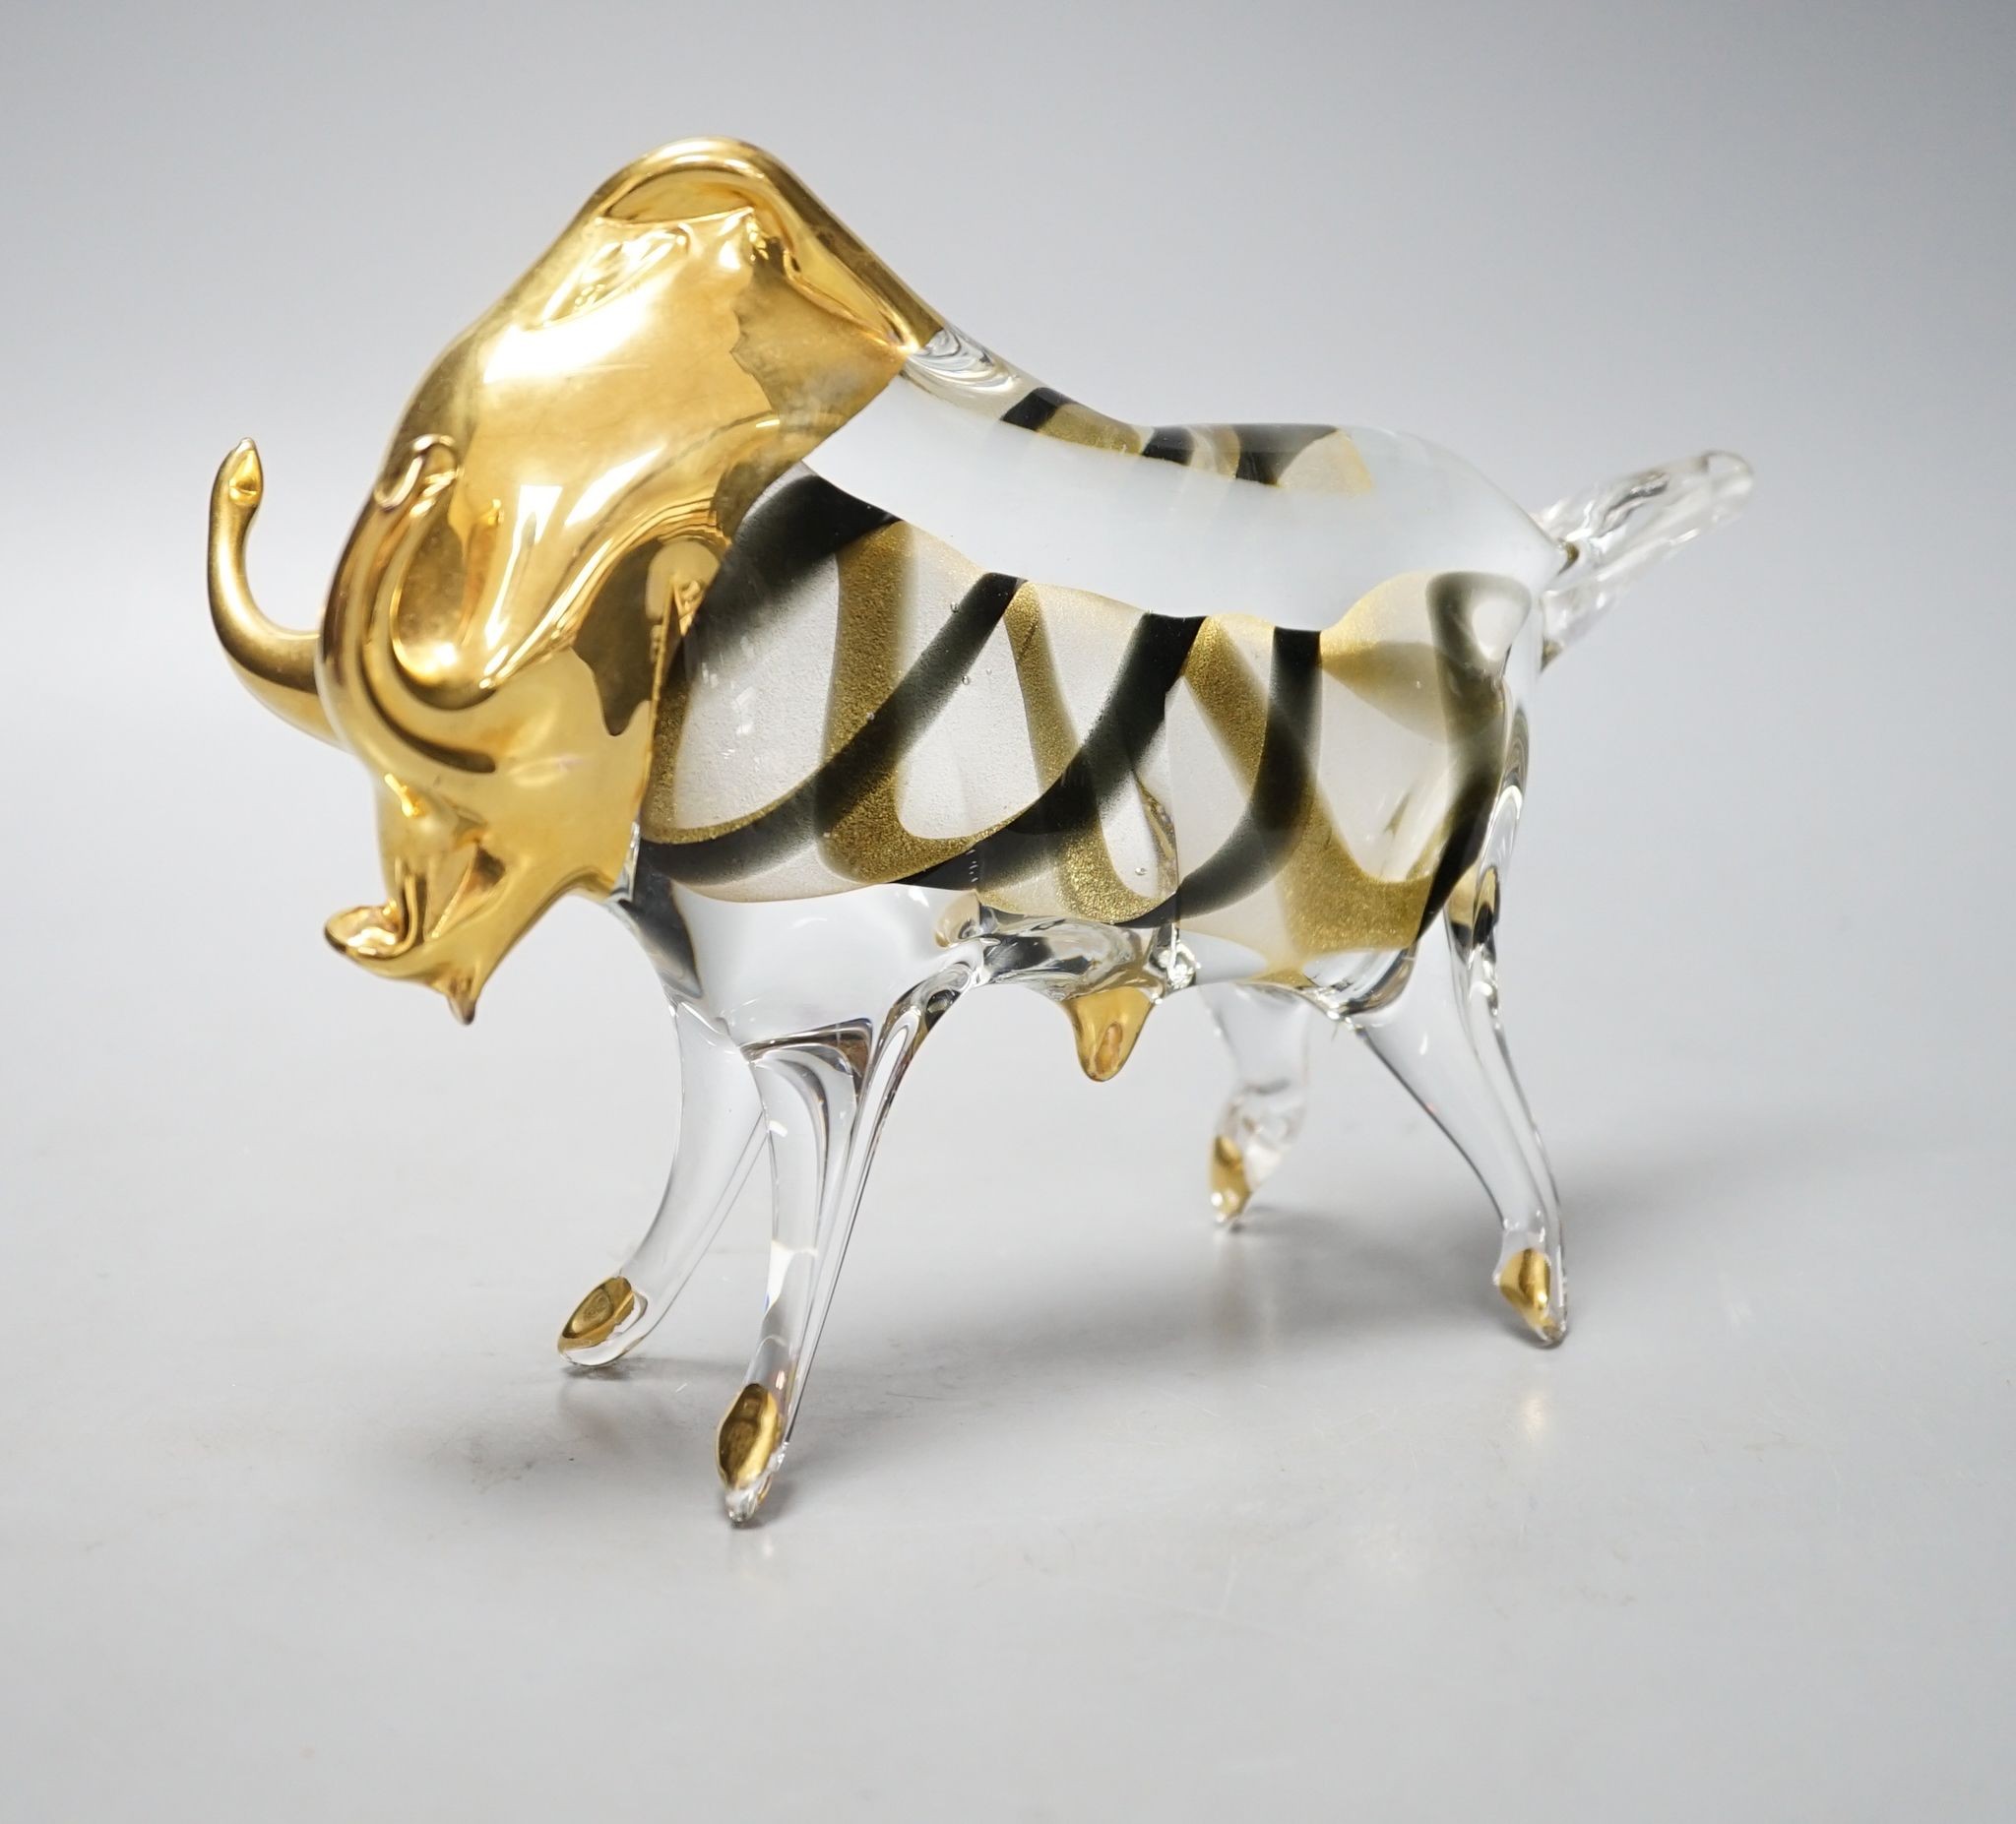 A Murano glass model of a bull, 17.5 cms high x 23 cms wide